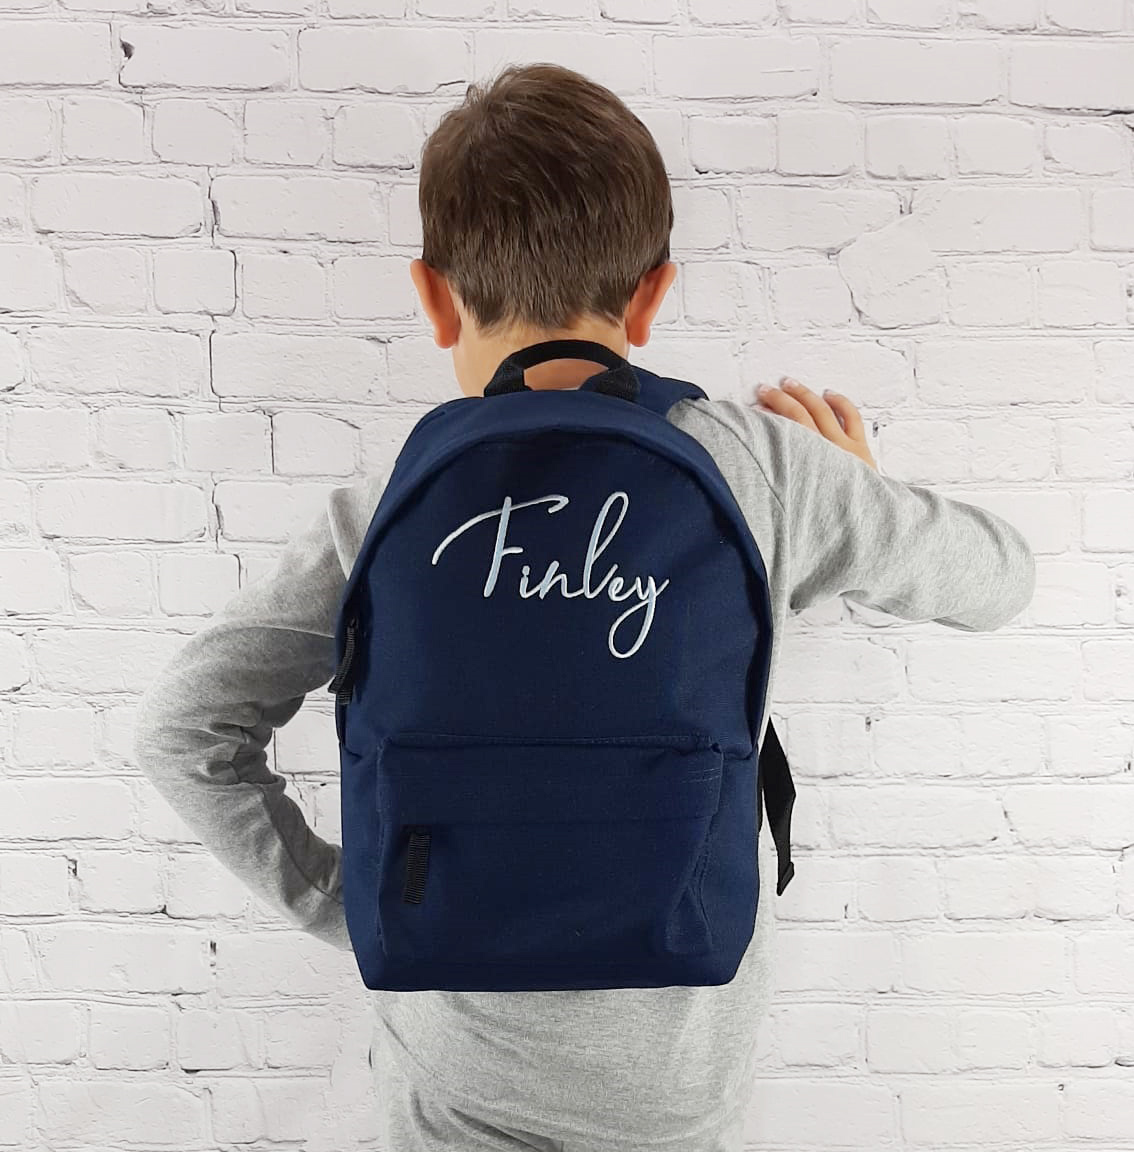 School backpack embroidered personalisation in any colour thread